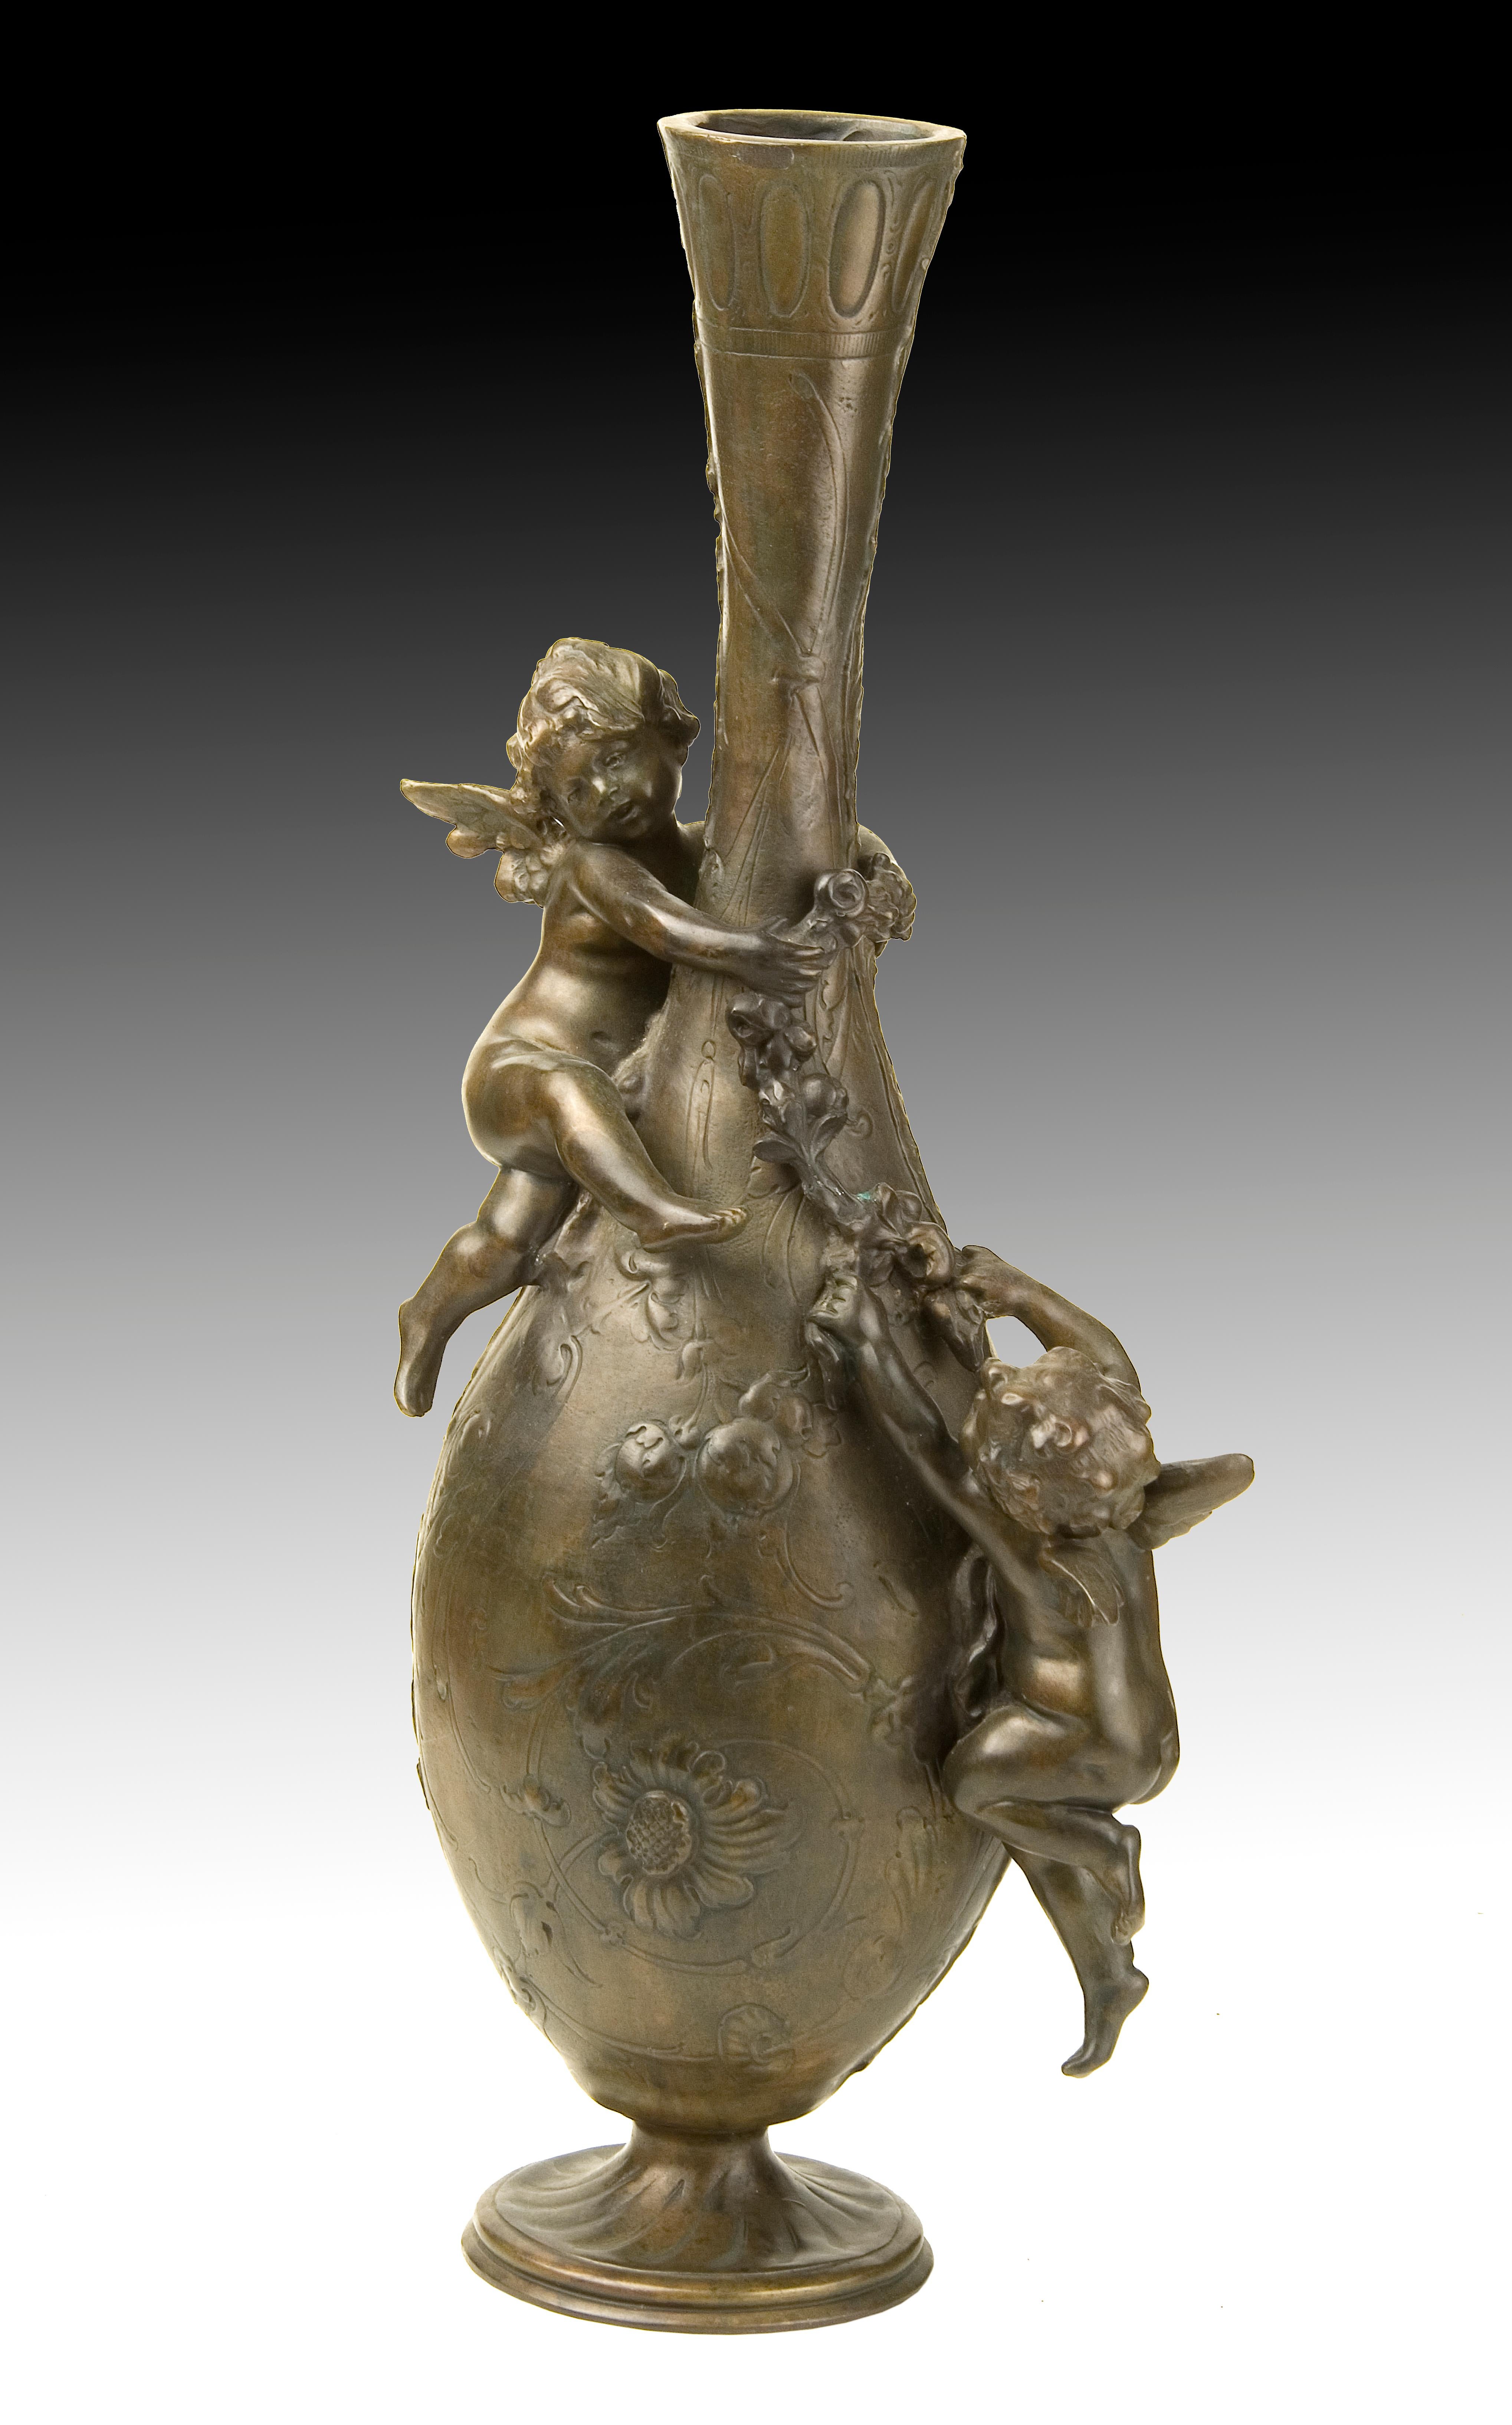 Neoclassical Revival Bronze Vase with Cherubs or Cupids, 19th-20th Centuries